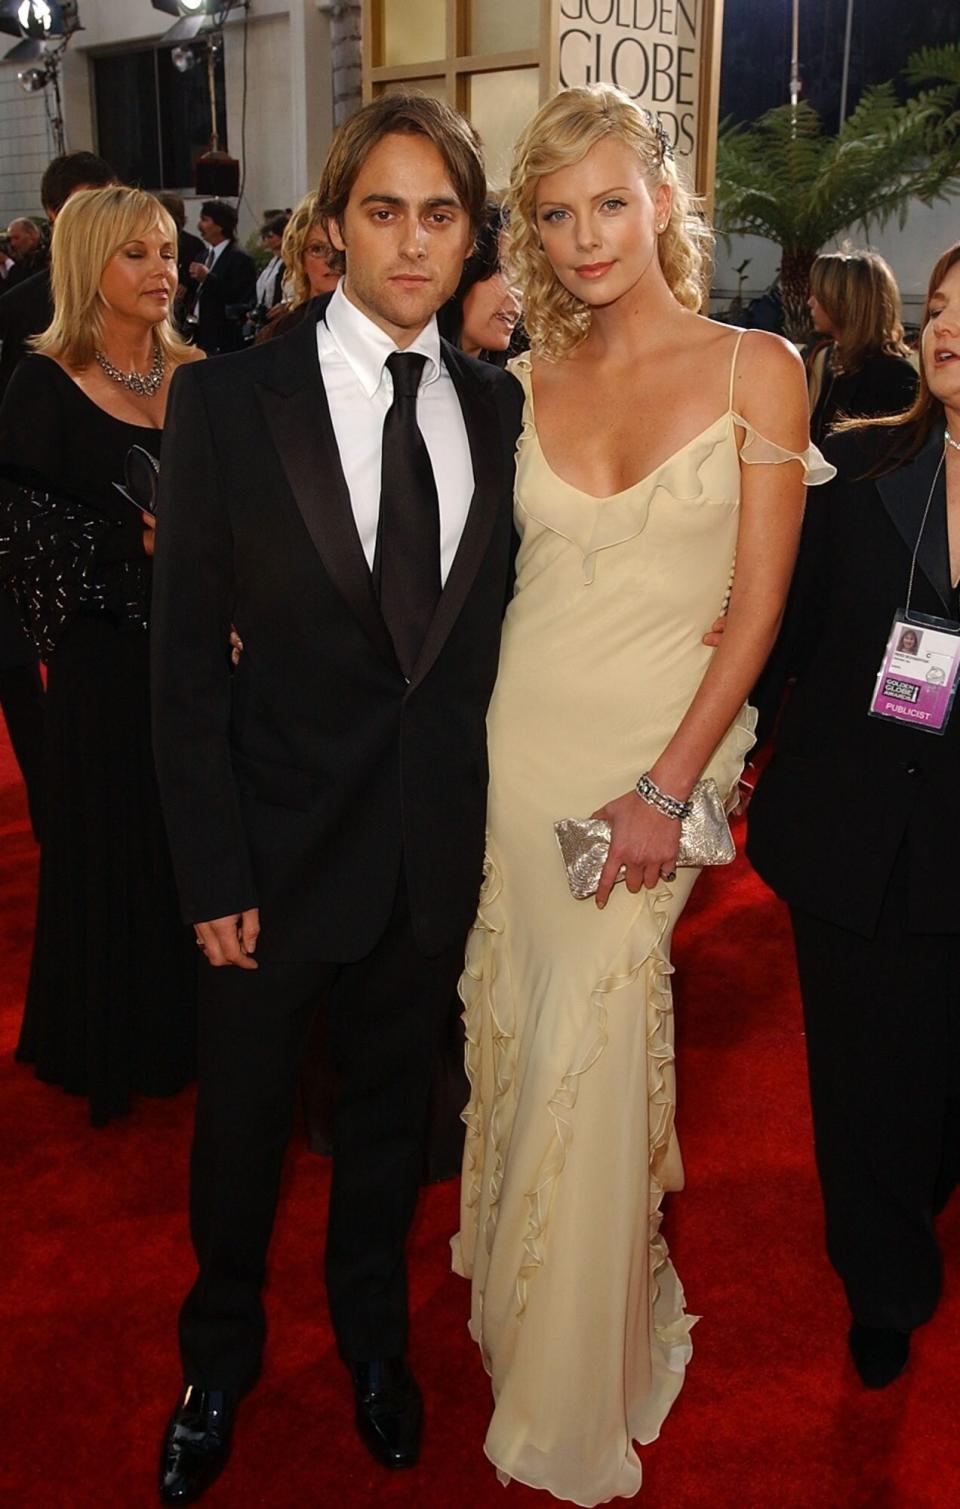 TBT: Charlize Theron and Stuart Townsend